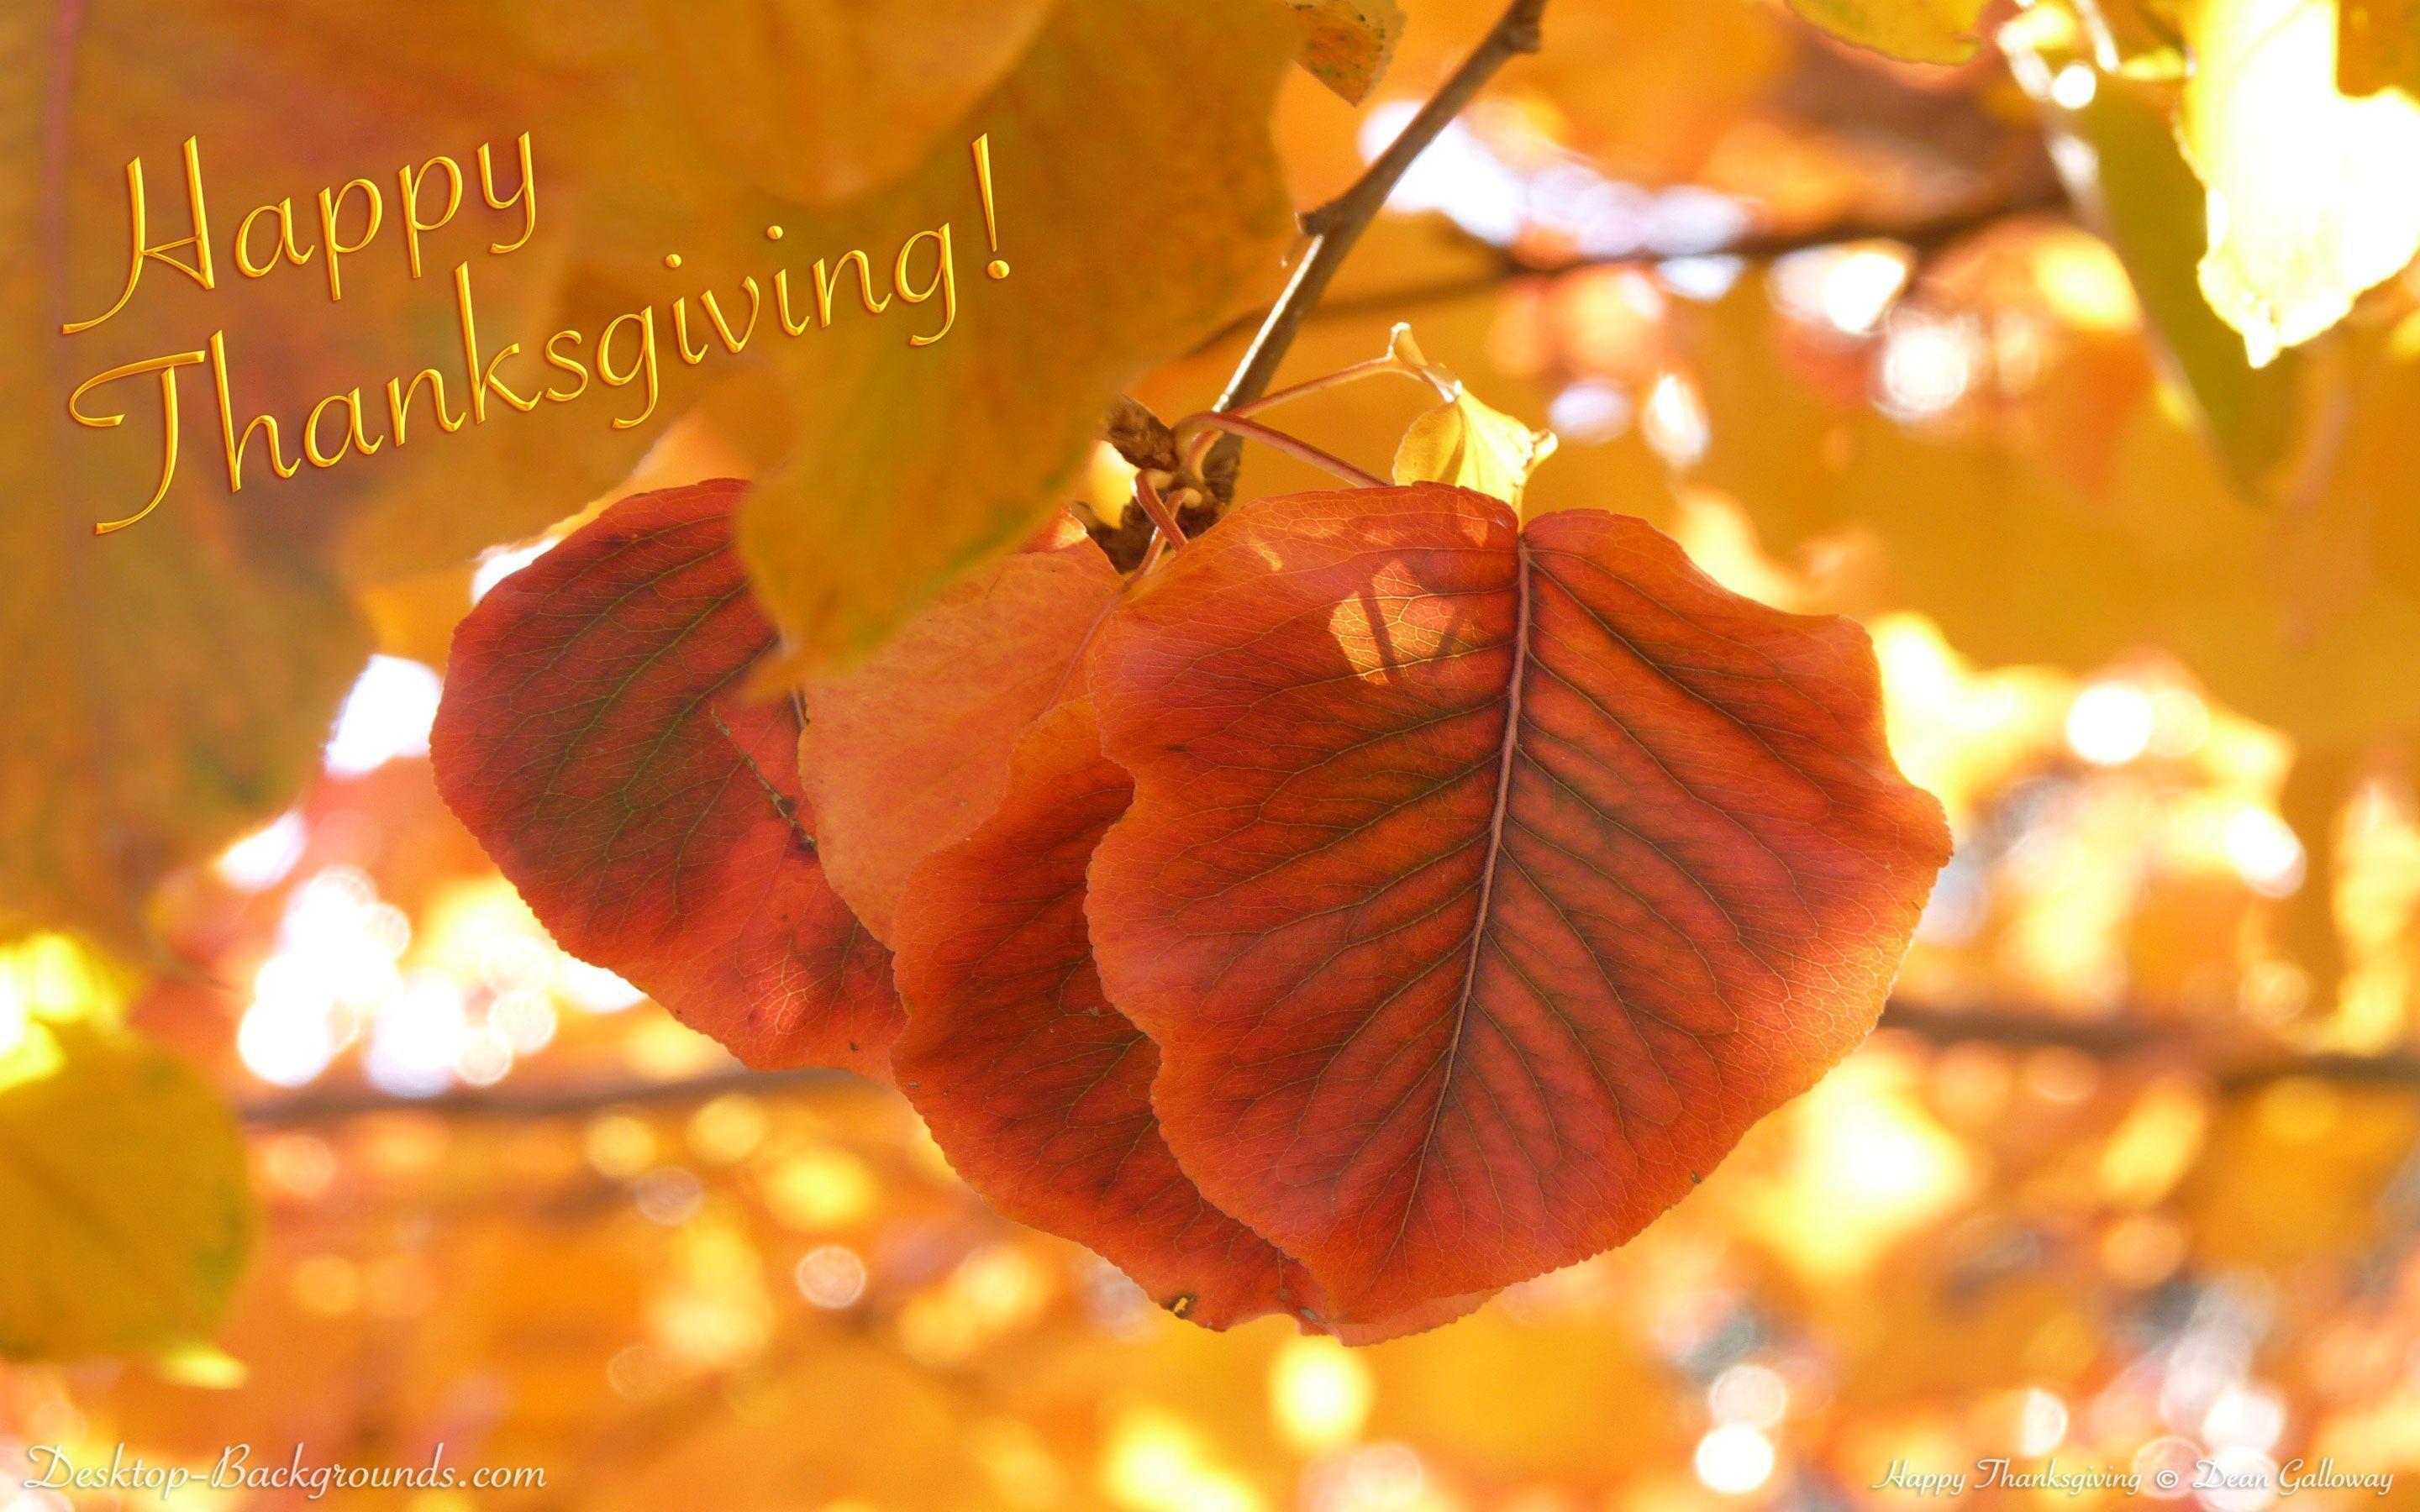 Thanksgiving Wishes Wallpaper HD With Leaf And Nature taken